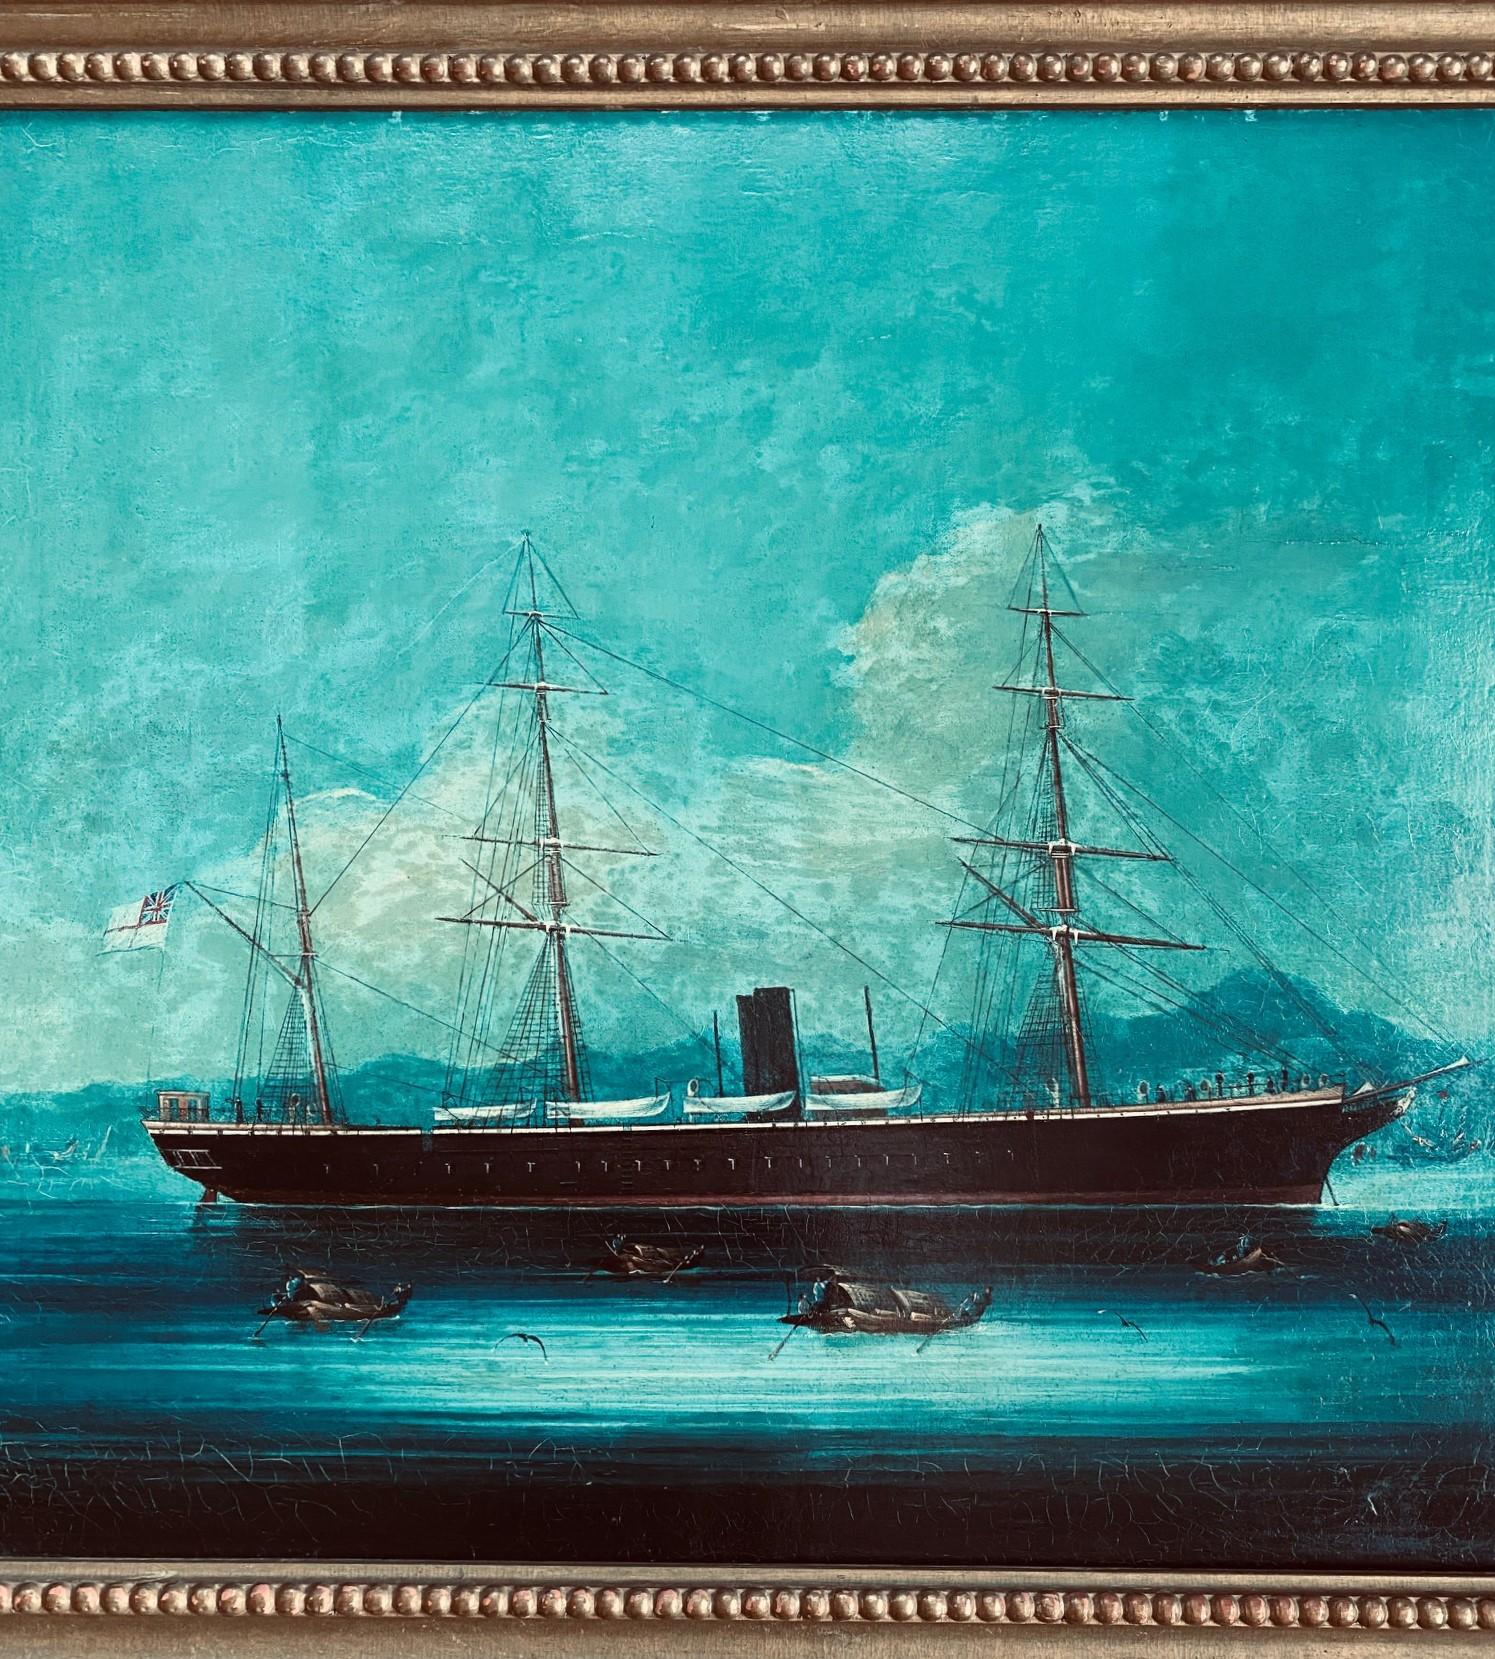 19th century China trade seascape with a tea Clipper in Hong Kong Harbor, circa 1850, an oil on canvas seascape with starboard side view of a bark rigged auxiliary steamer at anchor in Hong Kong's Victoria Harbor, under full standing rigging with